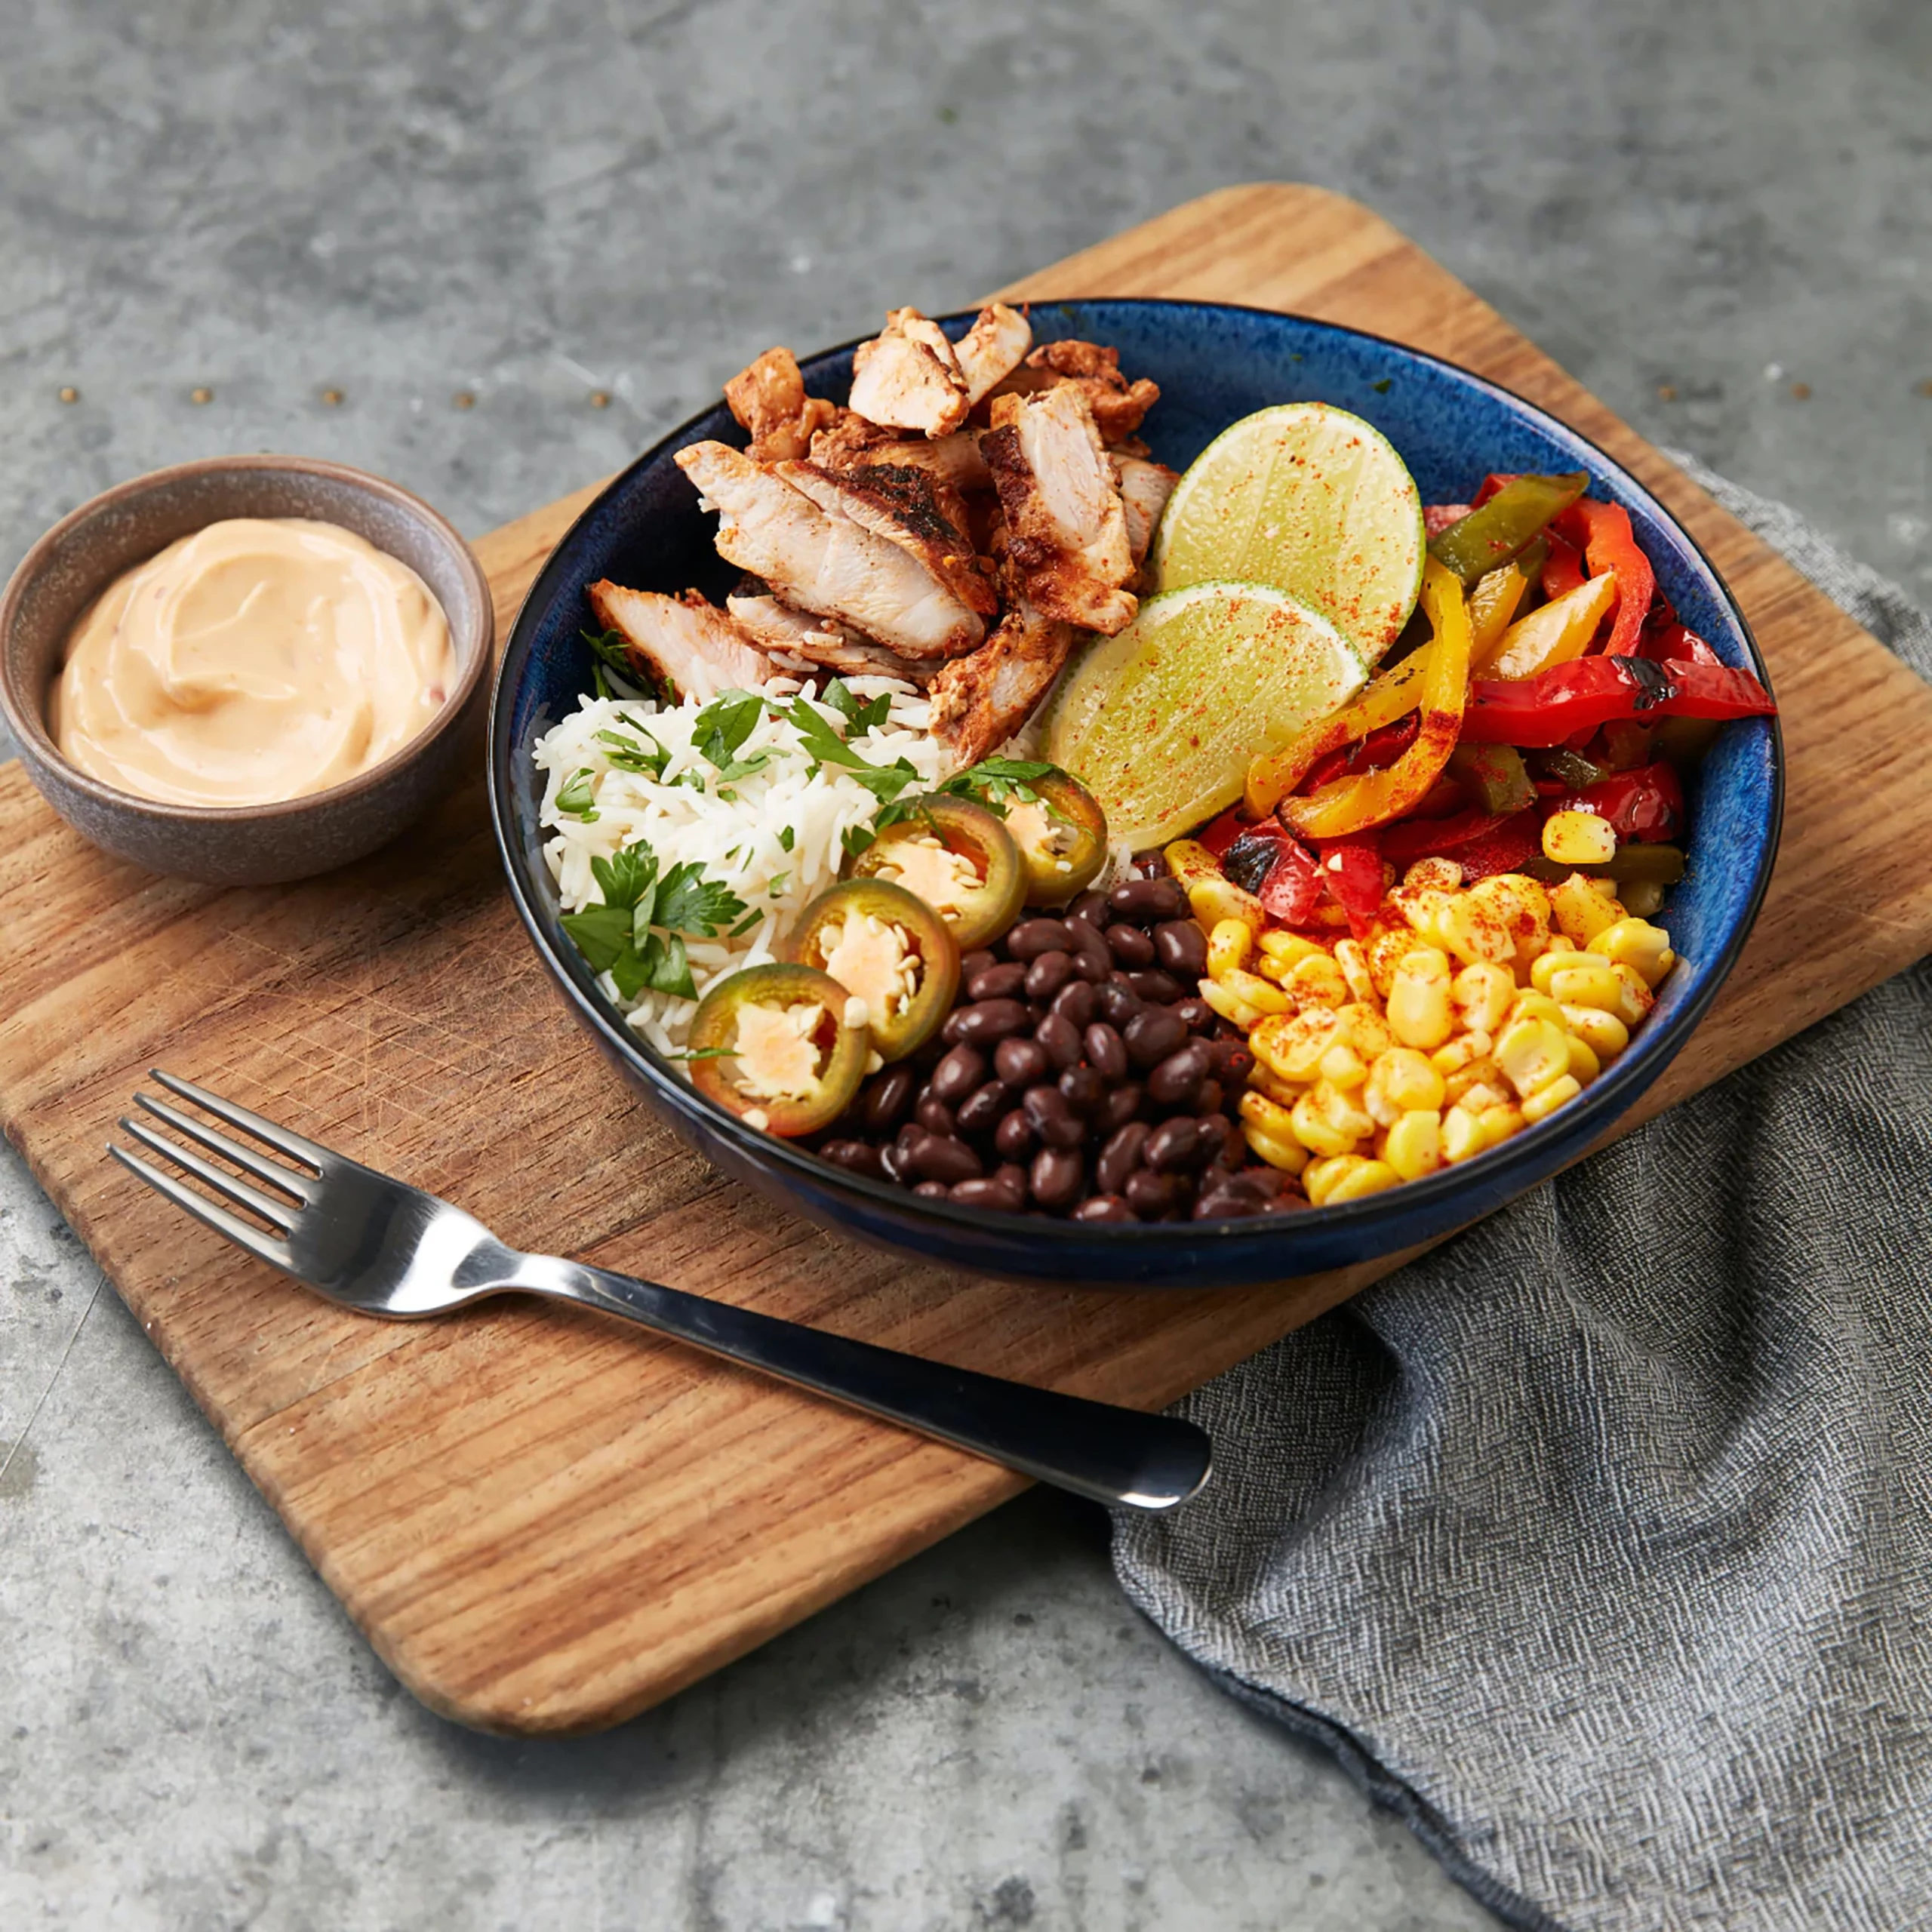 Chipotle chicken burrito bowl; Chipotle is a good example of a restaurant taking advantage of its SWOT strengths for profitability.